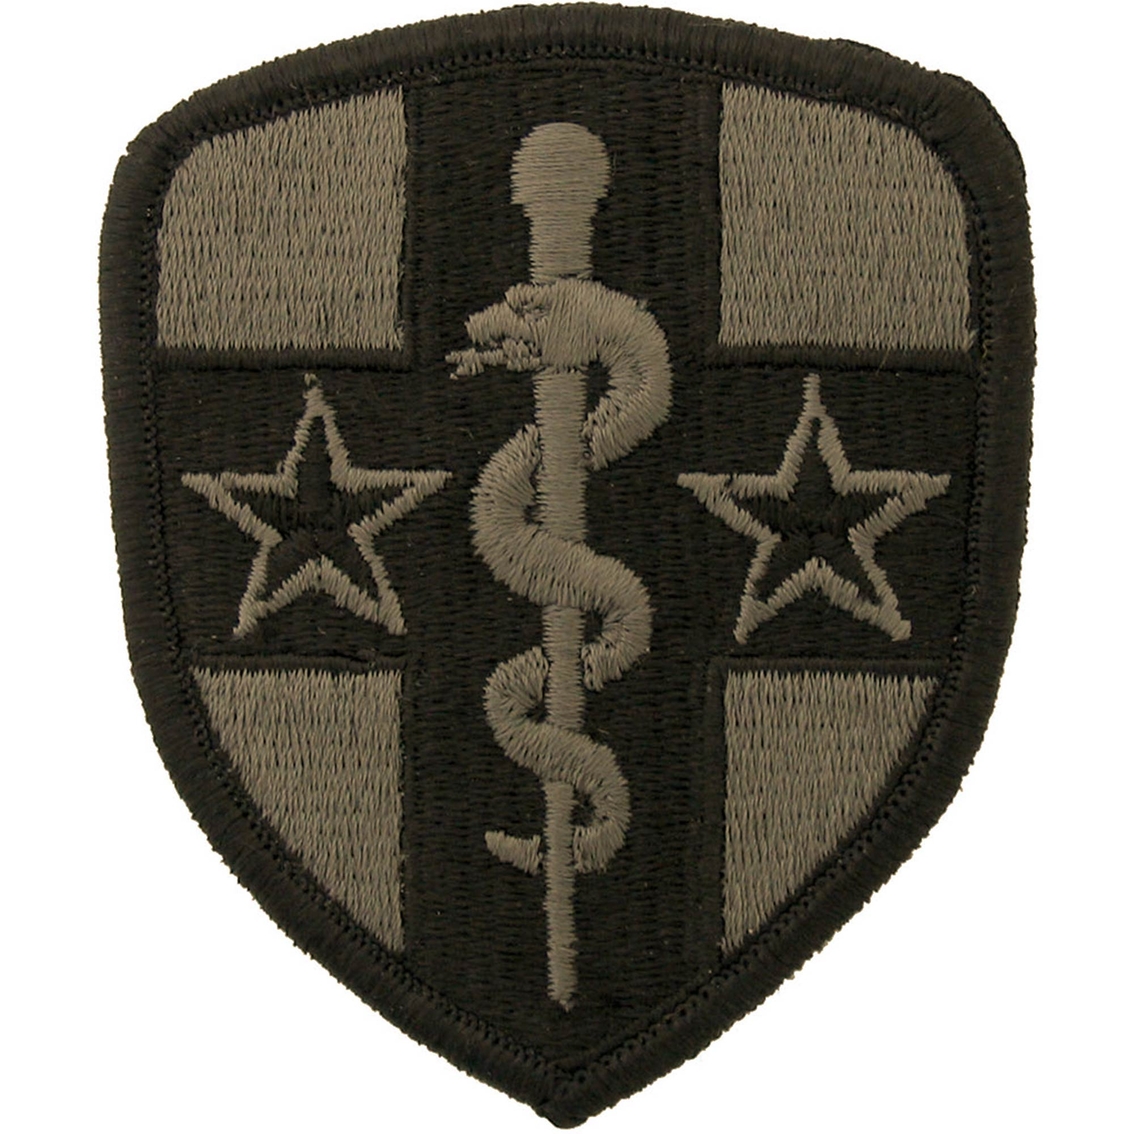 ARMY PATCH 7th MEDICAL COMMAND 